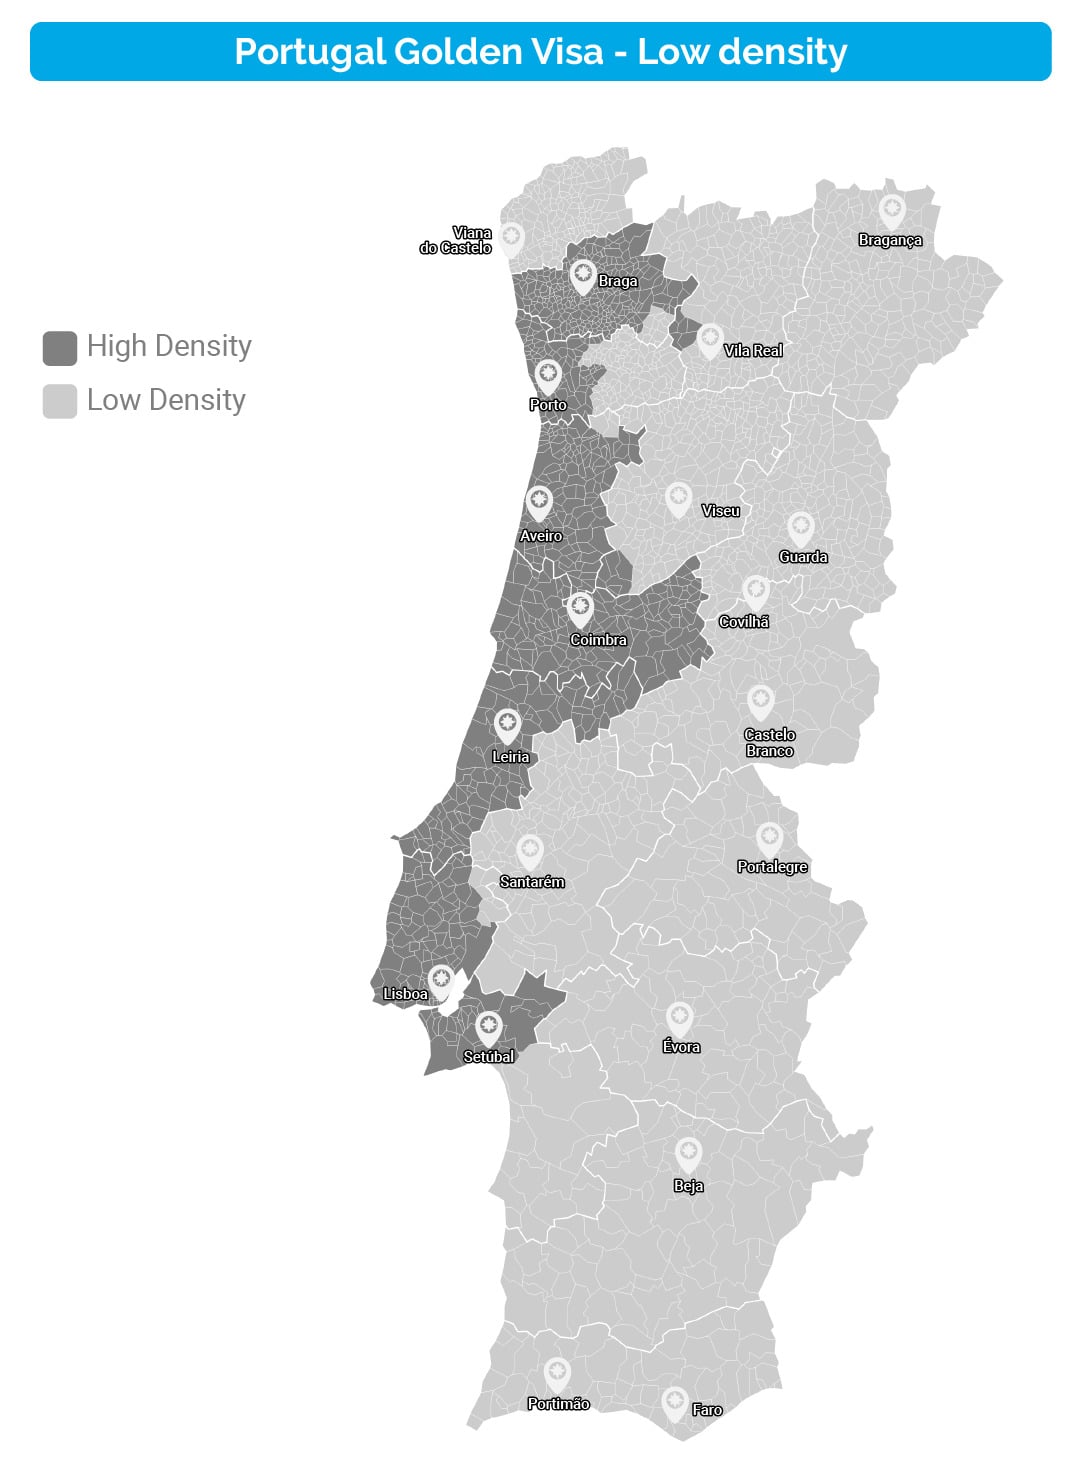 Map showing the high and low density areas in Portugal.